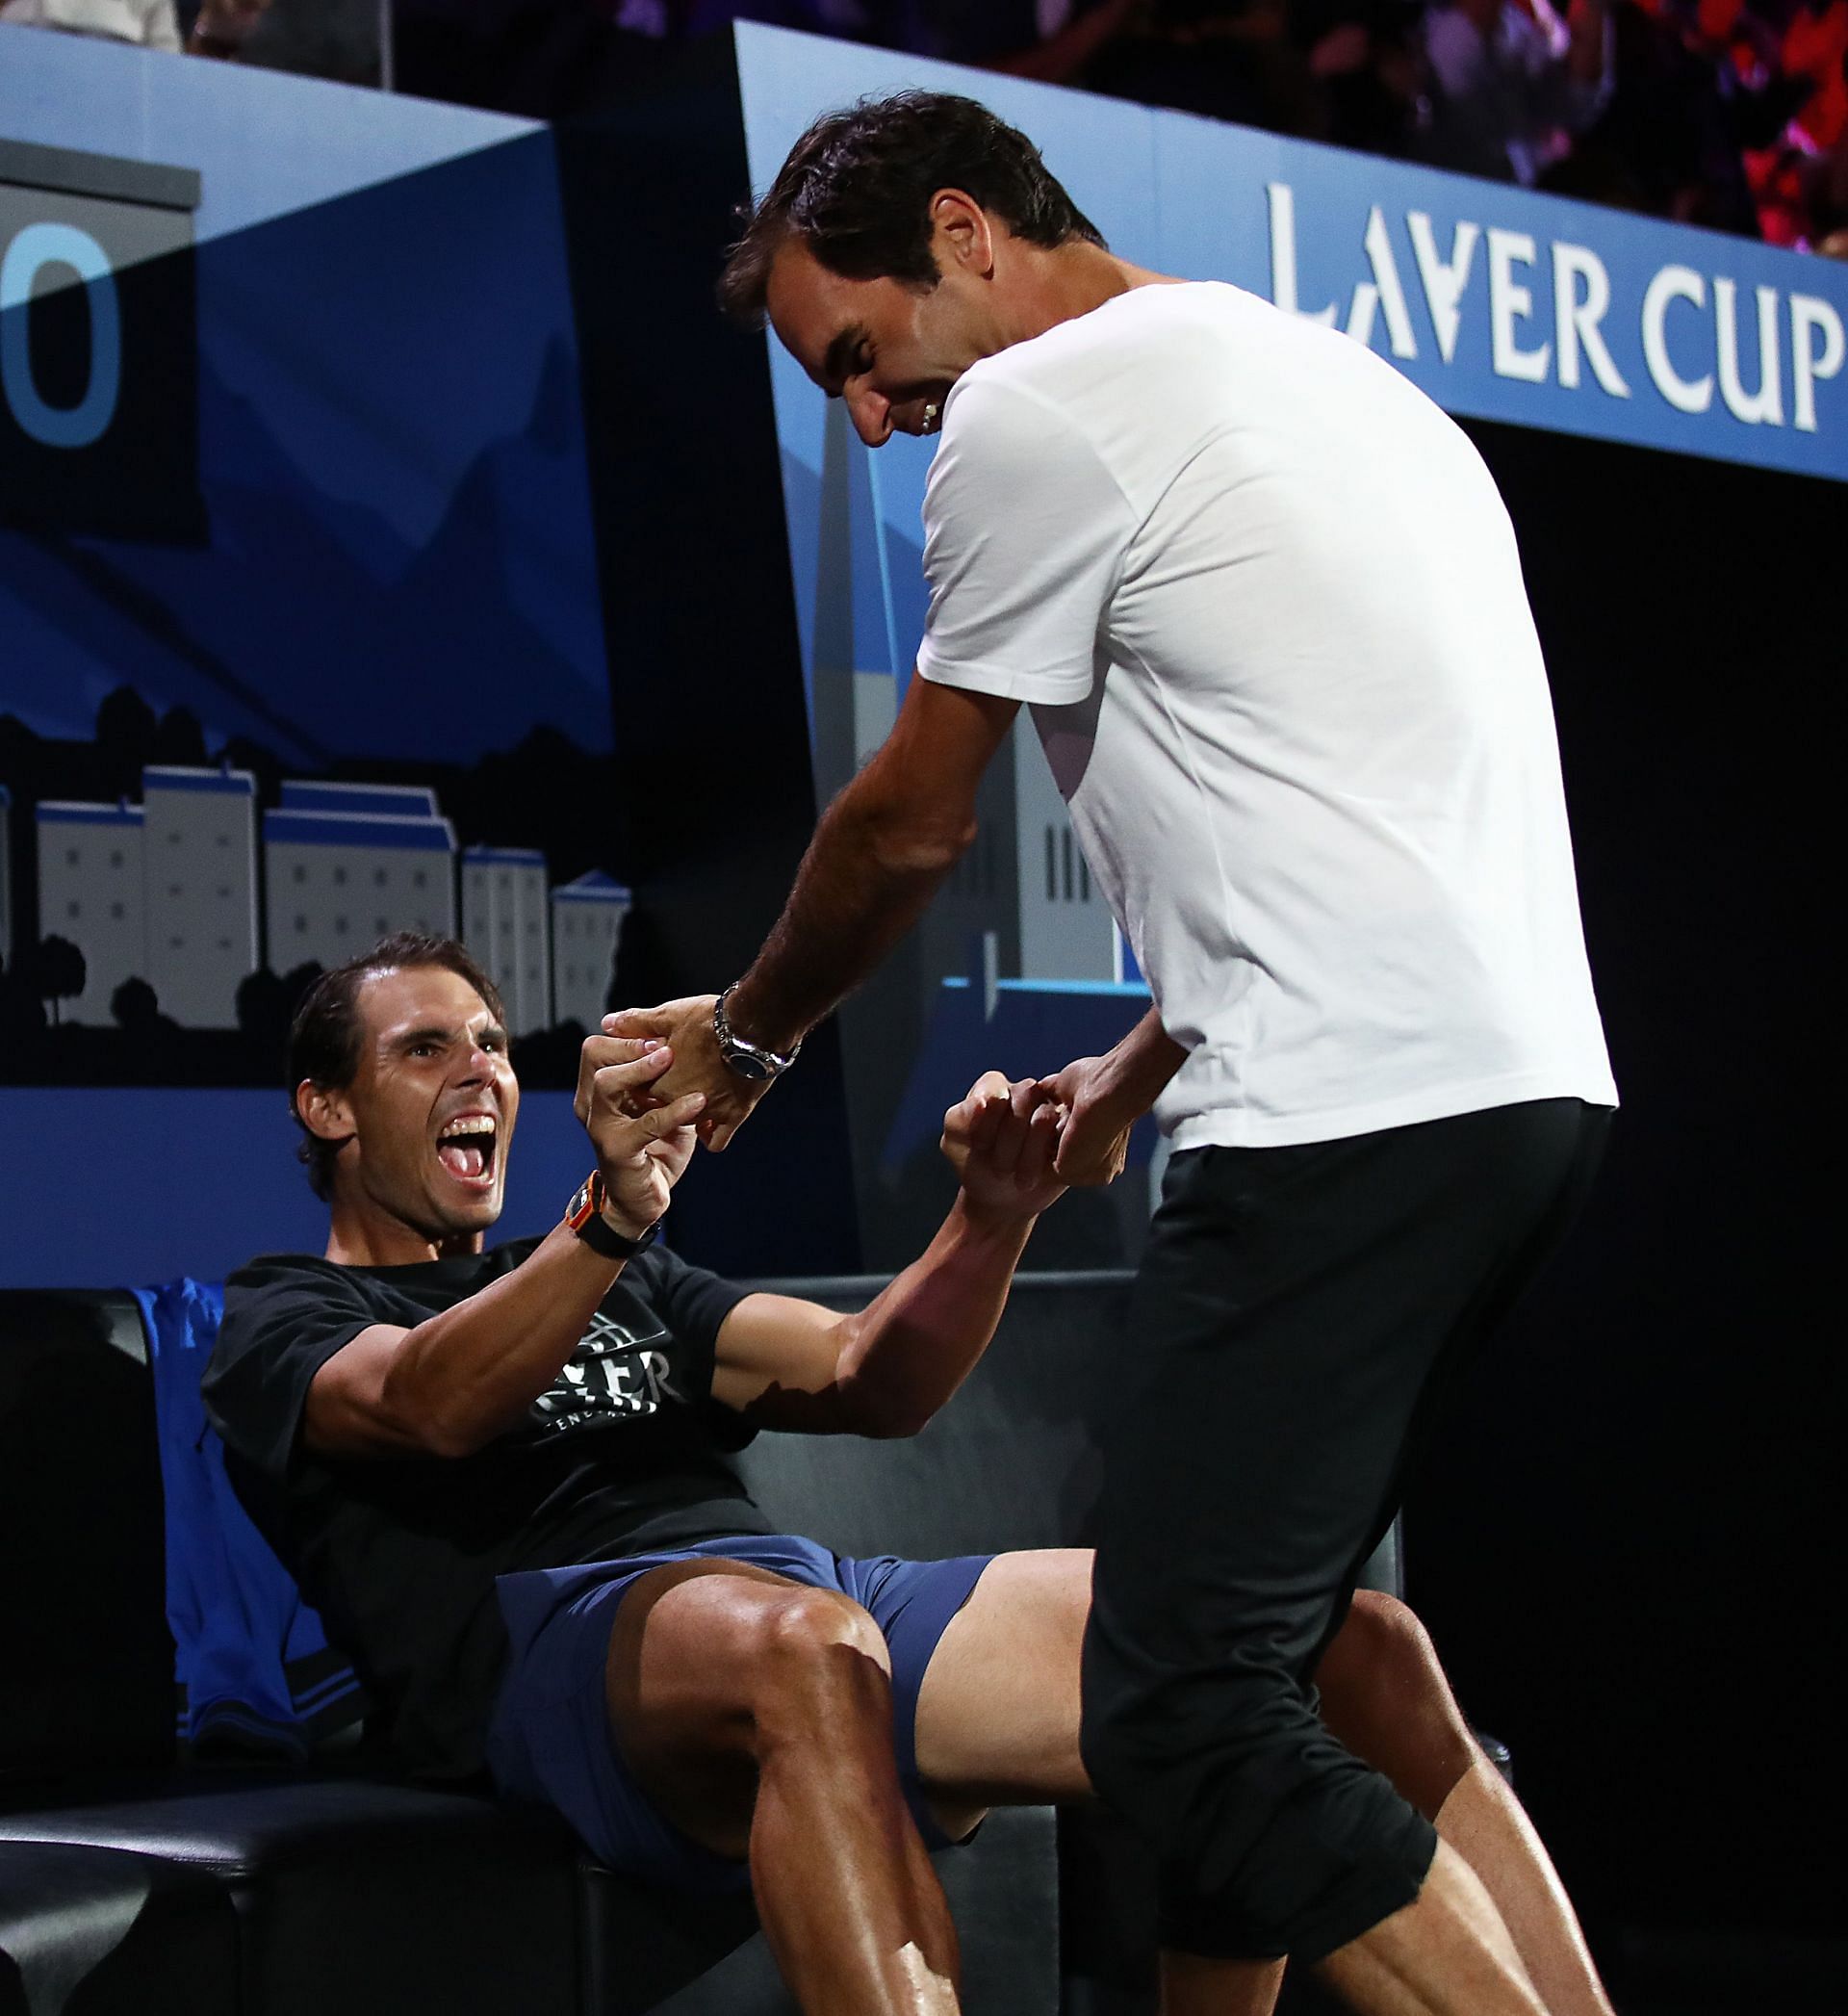 Roger Federer and Rafael Nadal share a moment during the 2019 Laver Cup